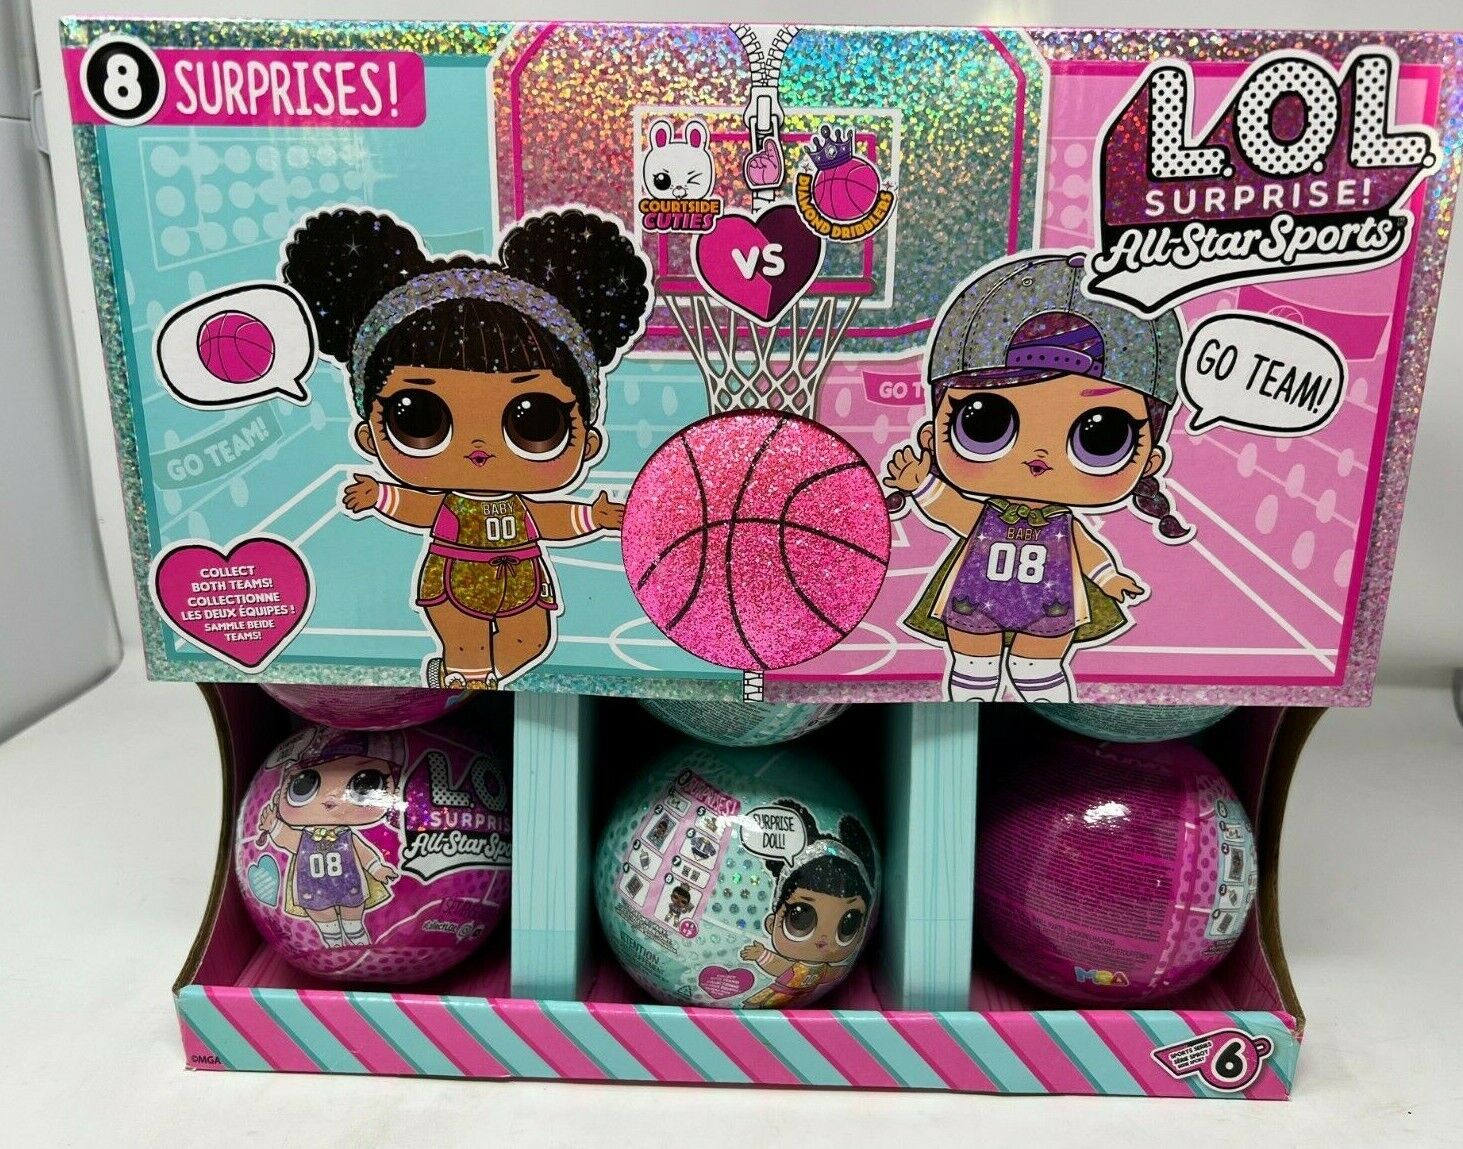 LOL Surprise! All-Star BBs Sports Sparkly Basketball Series 6 - Case of 12 